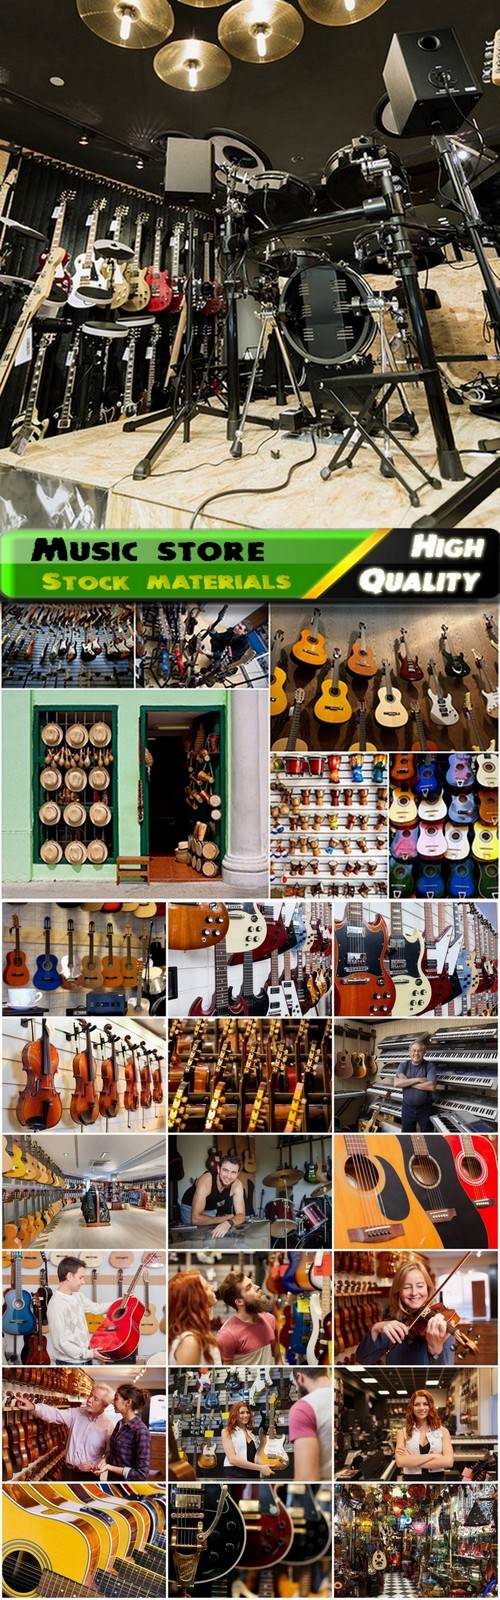 Music store sellers of musical instruments - 25 HQ Jpg